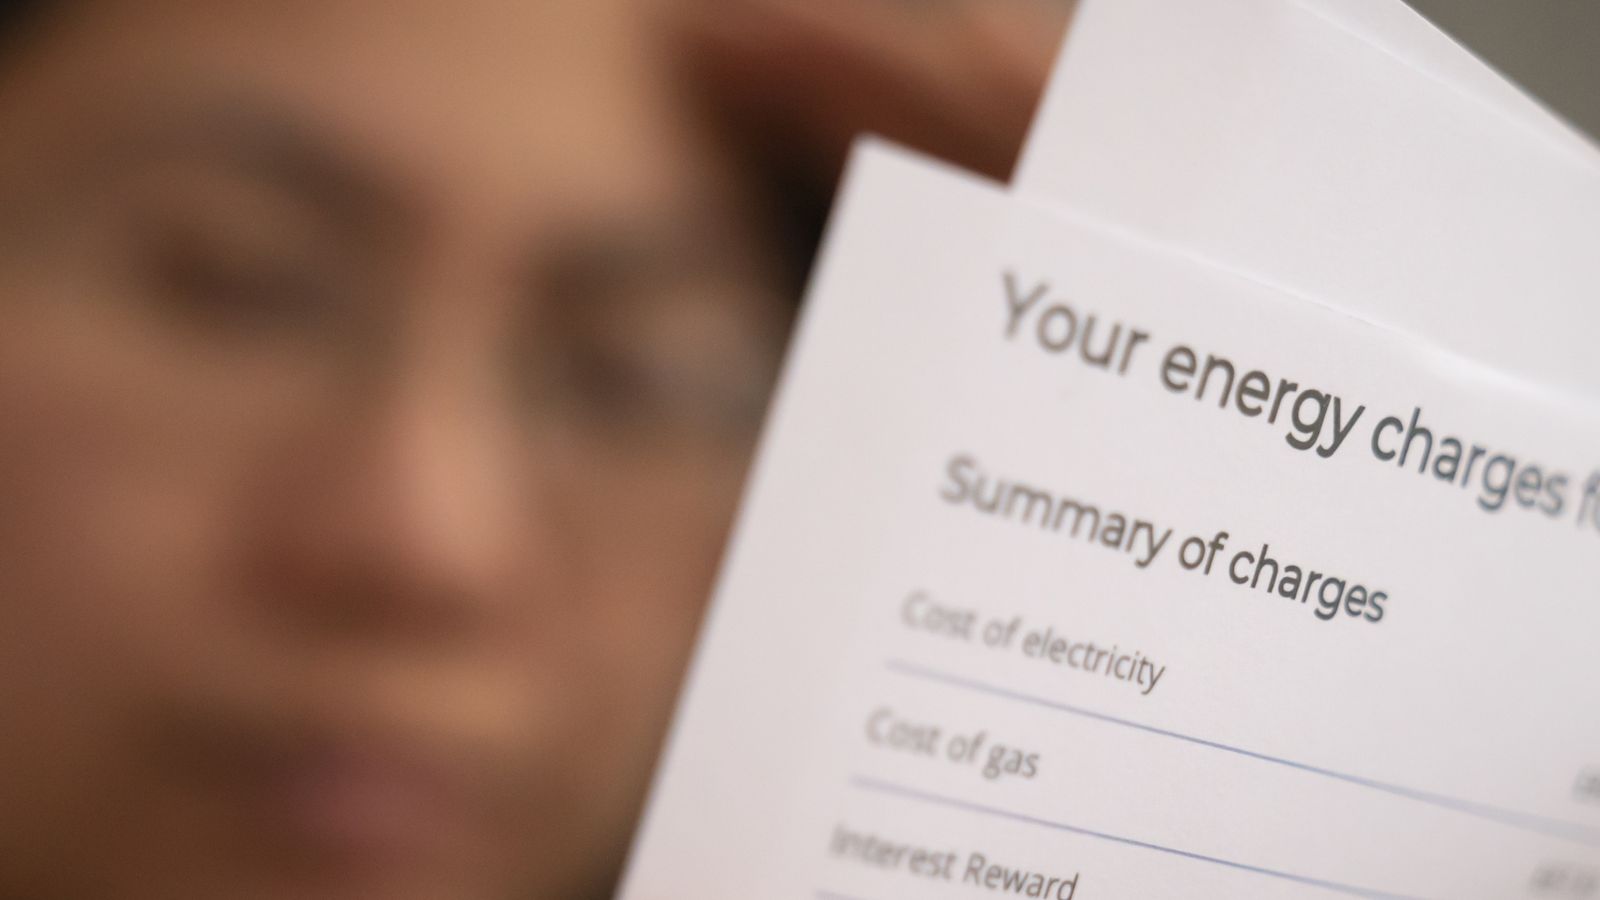 Cost of living: Who is proposing what to tackle soaring energy bills faced by struggling households?